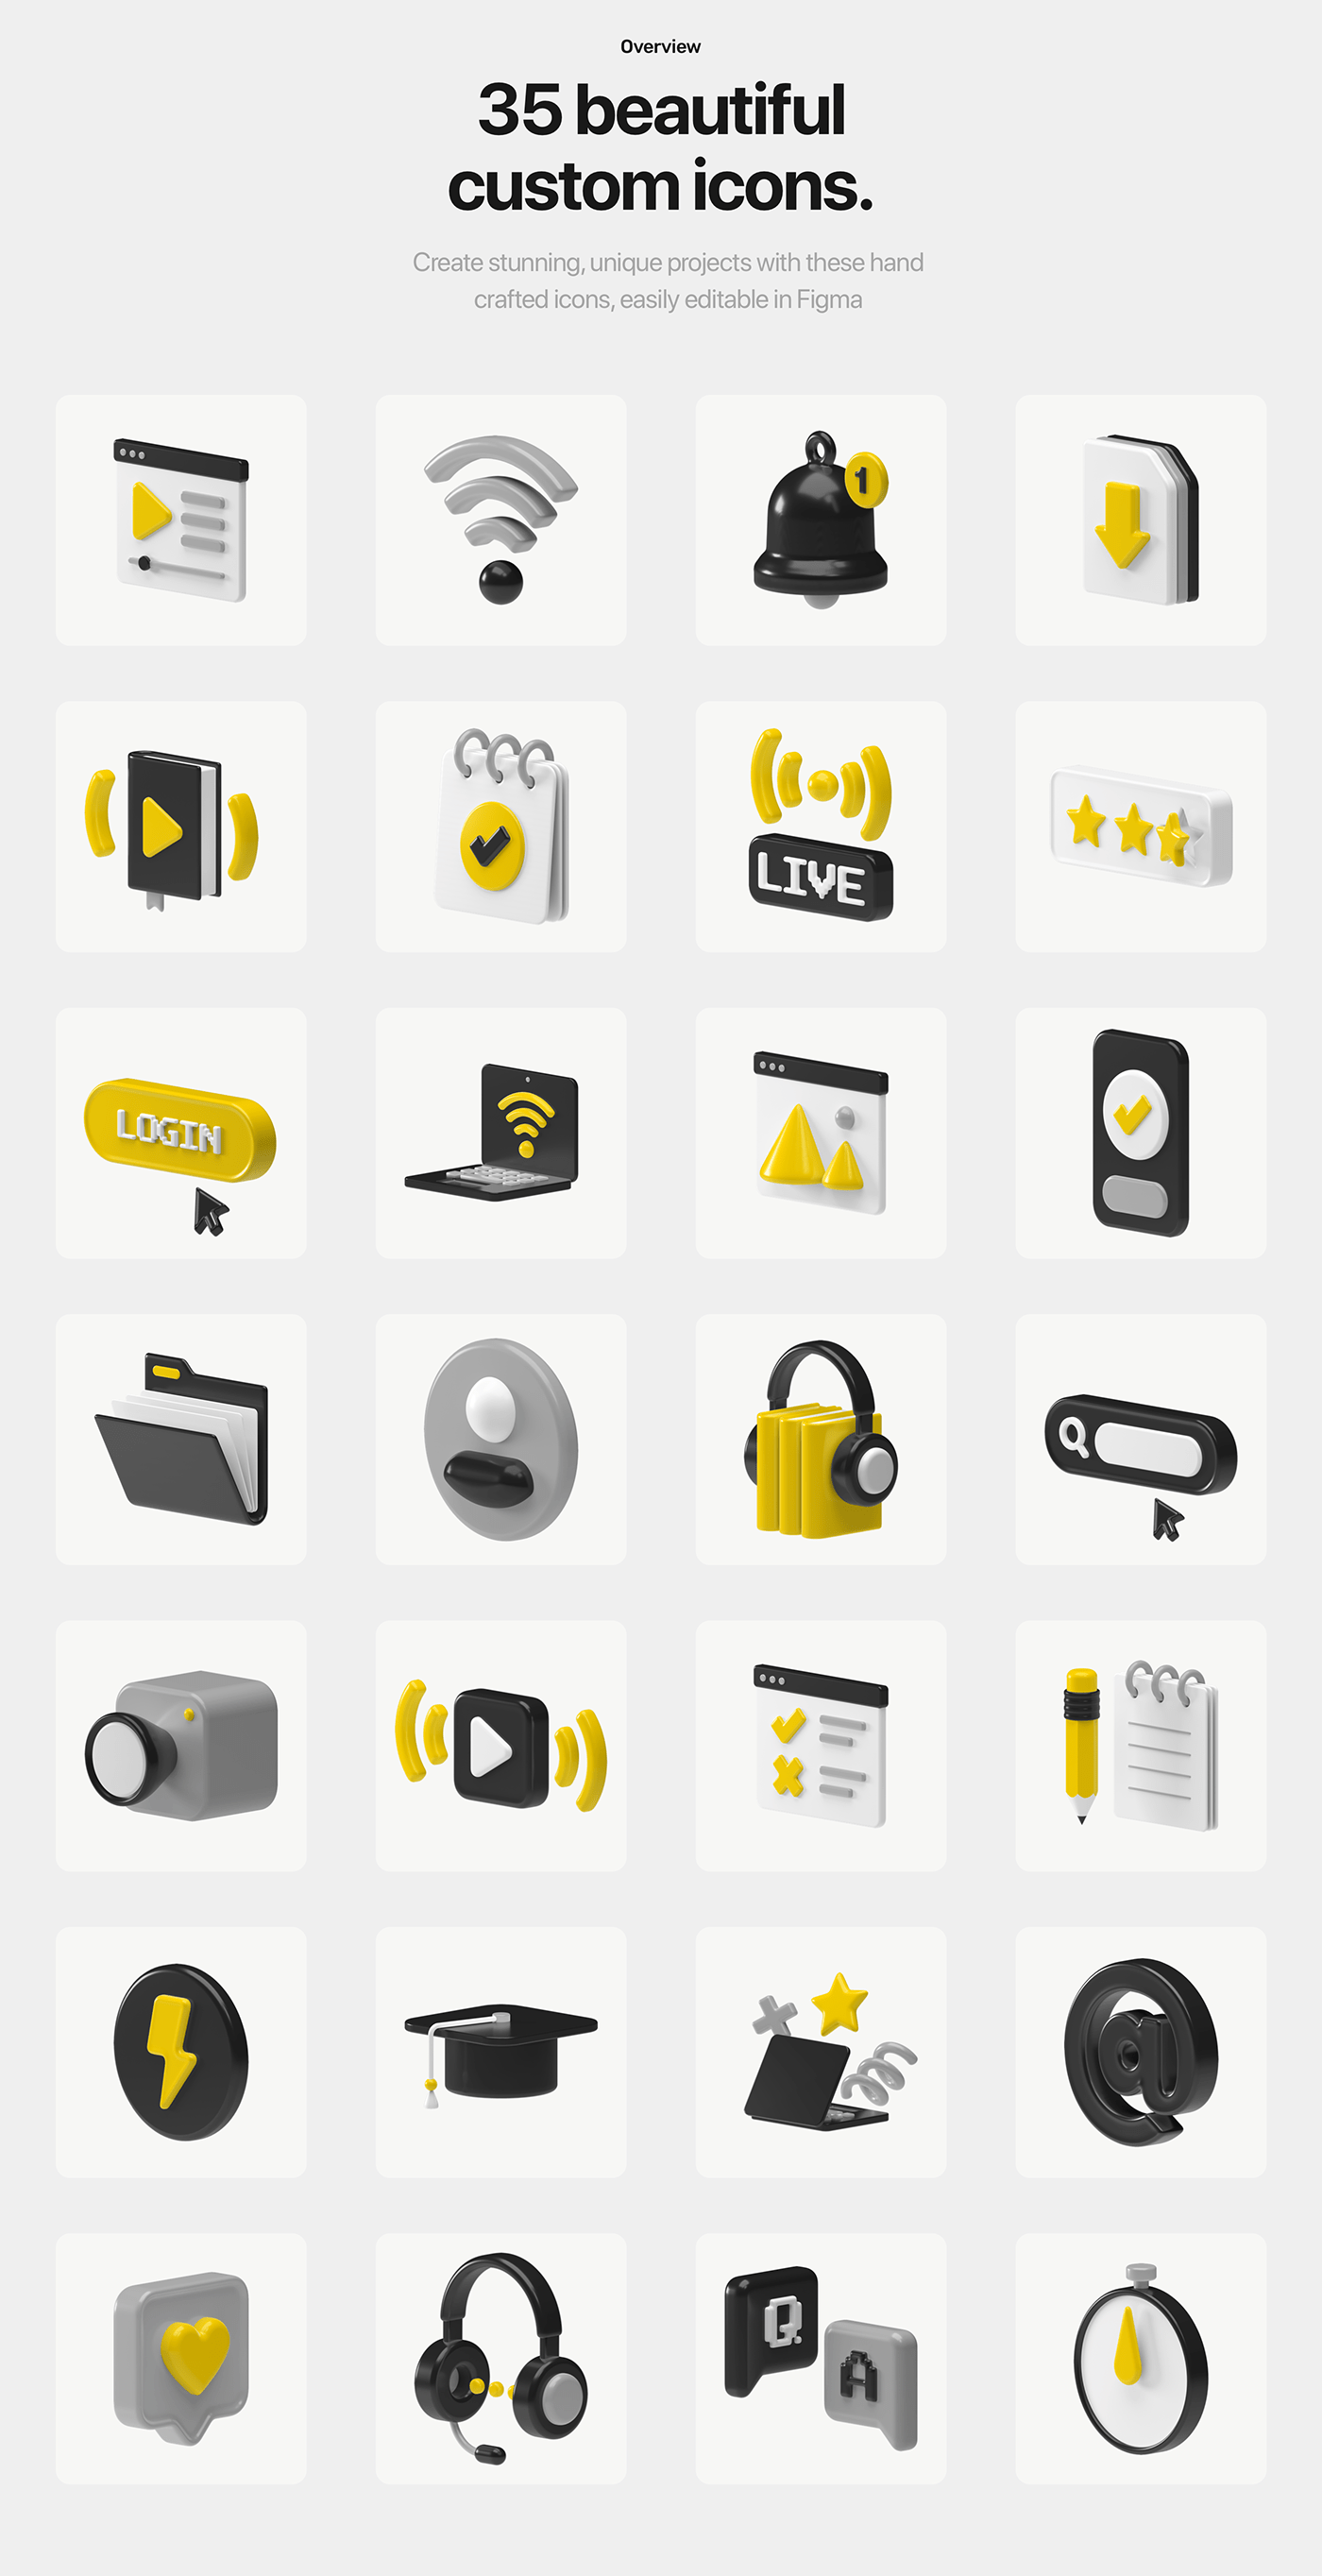 3d icons 3D illustration cinema 4d design tools e-learning Education free Online education study